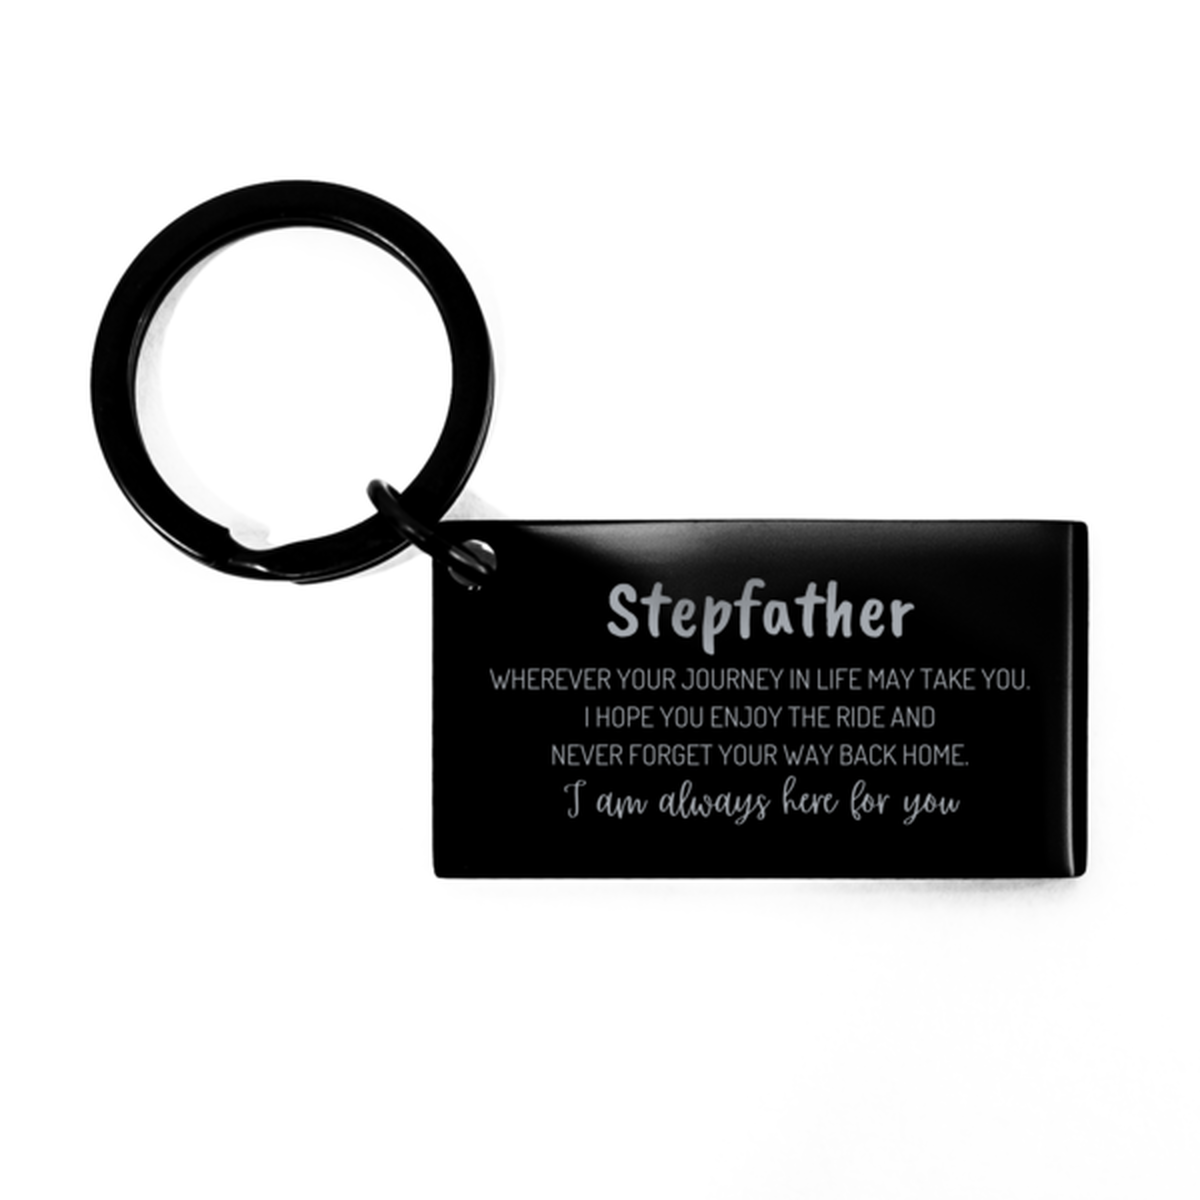 Stepfather wherever your journey in life may take you, I am always here for you Stepfather Keychain, Awesome Christmas Gifts For Stepfather, Stepfather Birthday Gifts for Men Women Family Loved One